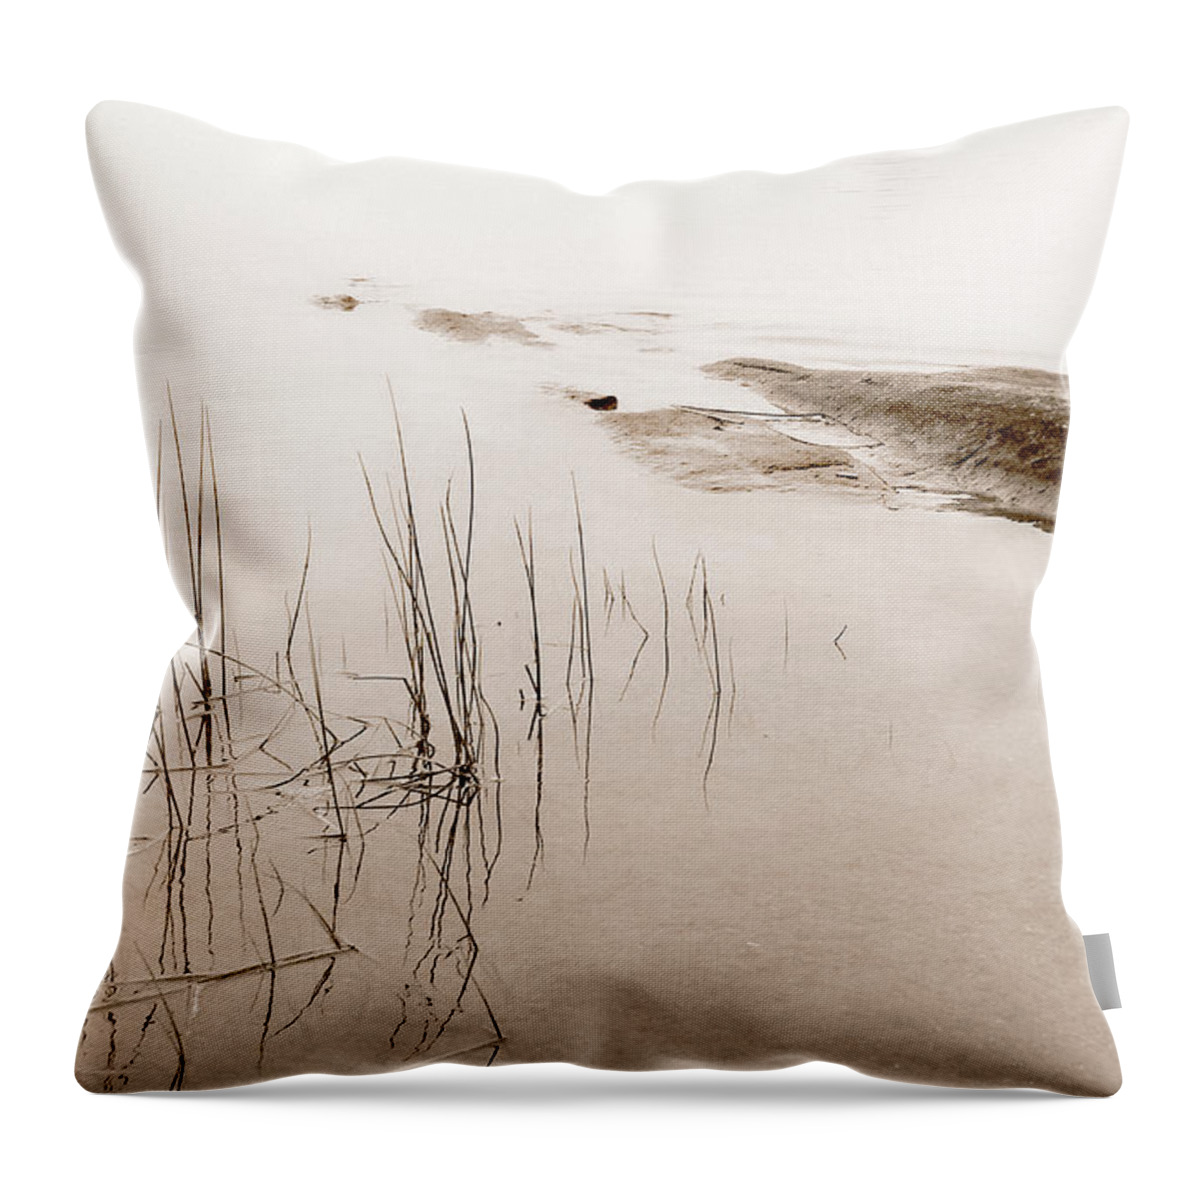 Water Throw Pillow featuring the photograph Peaceful Moment by Linda McRae